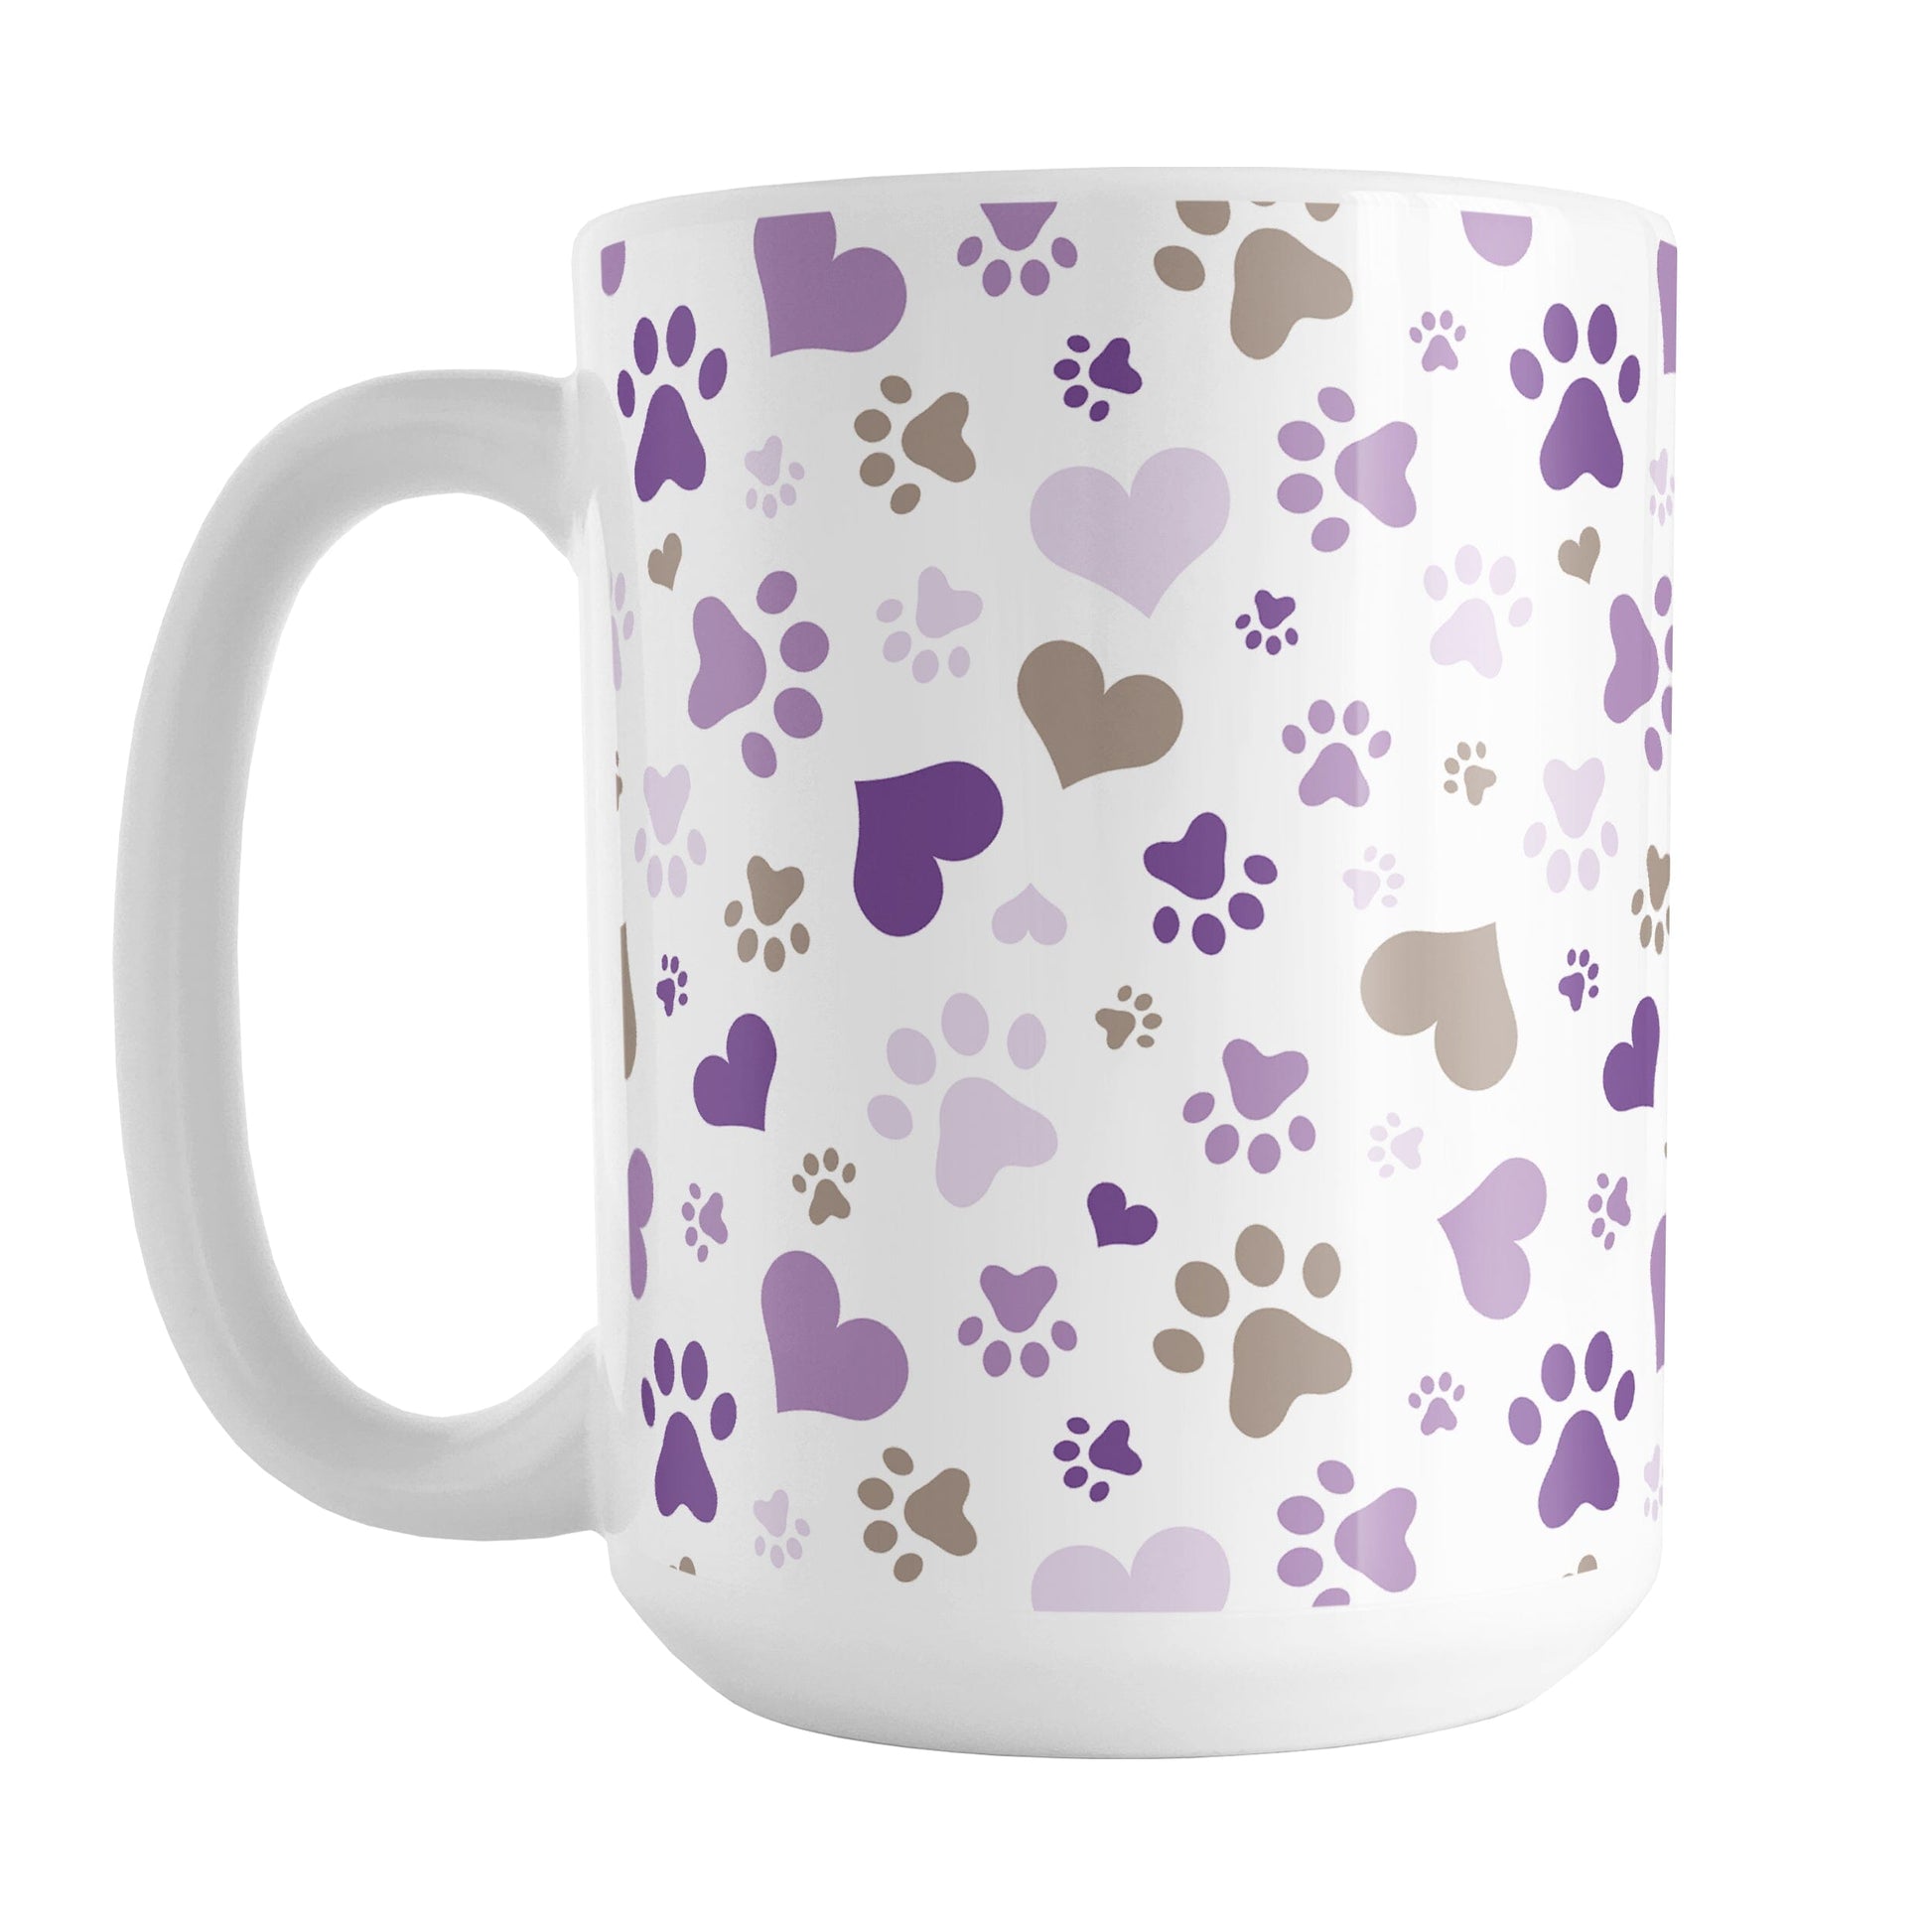 Purple Hearts and Paw Prints Mug (15oz) at Amy's Coffee Mugs. A ceramic coffee mug designed with a pattern of hearts and paw prints in brown and different shades of purple that wraps around the mug to the handle. This mug is perfect for people love dogs and cute paw print designs.